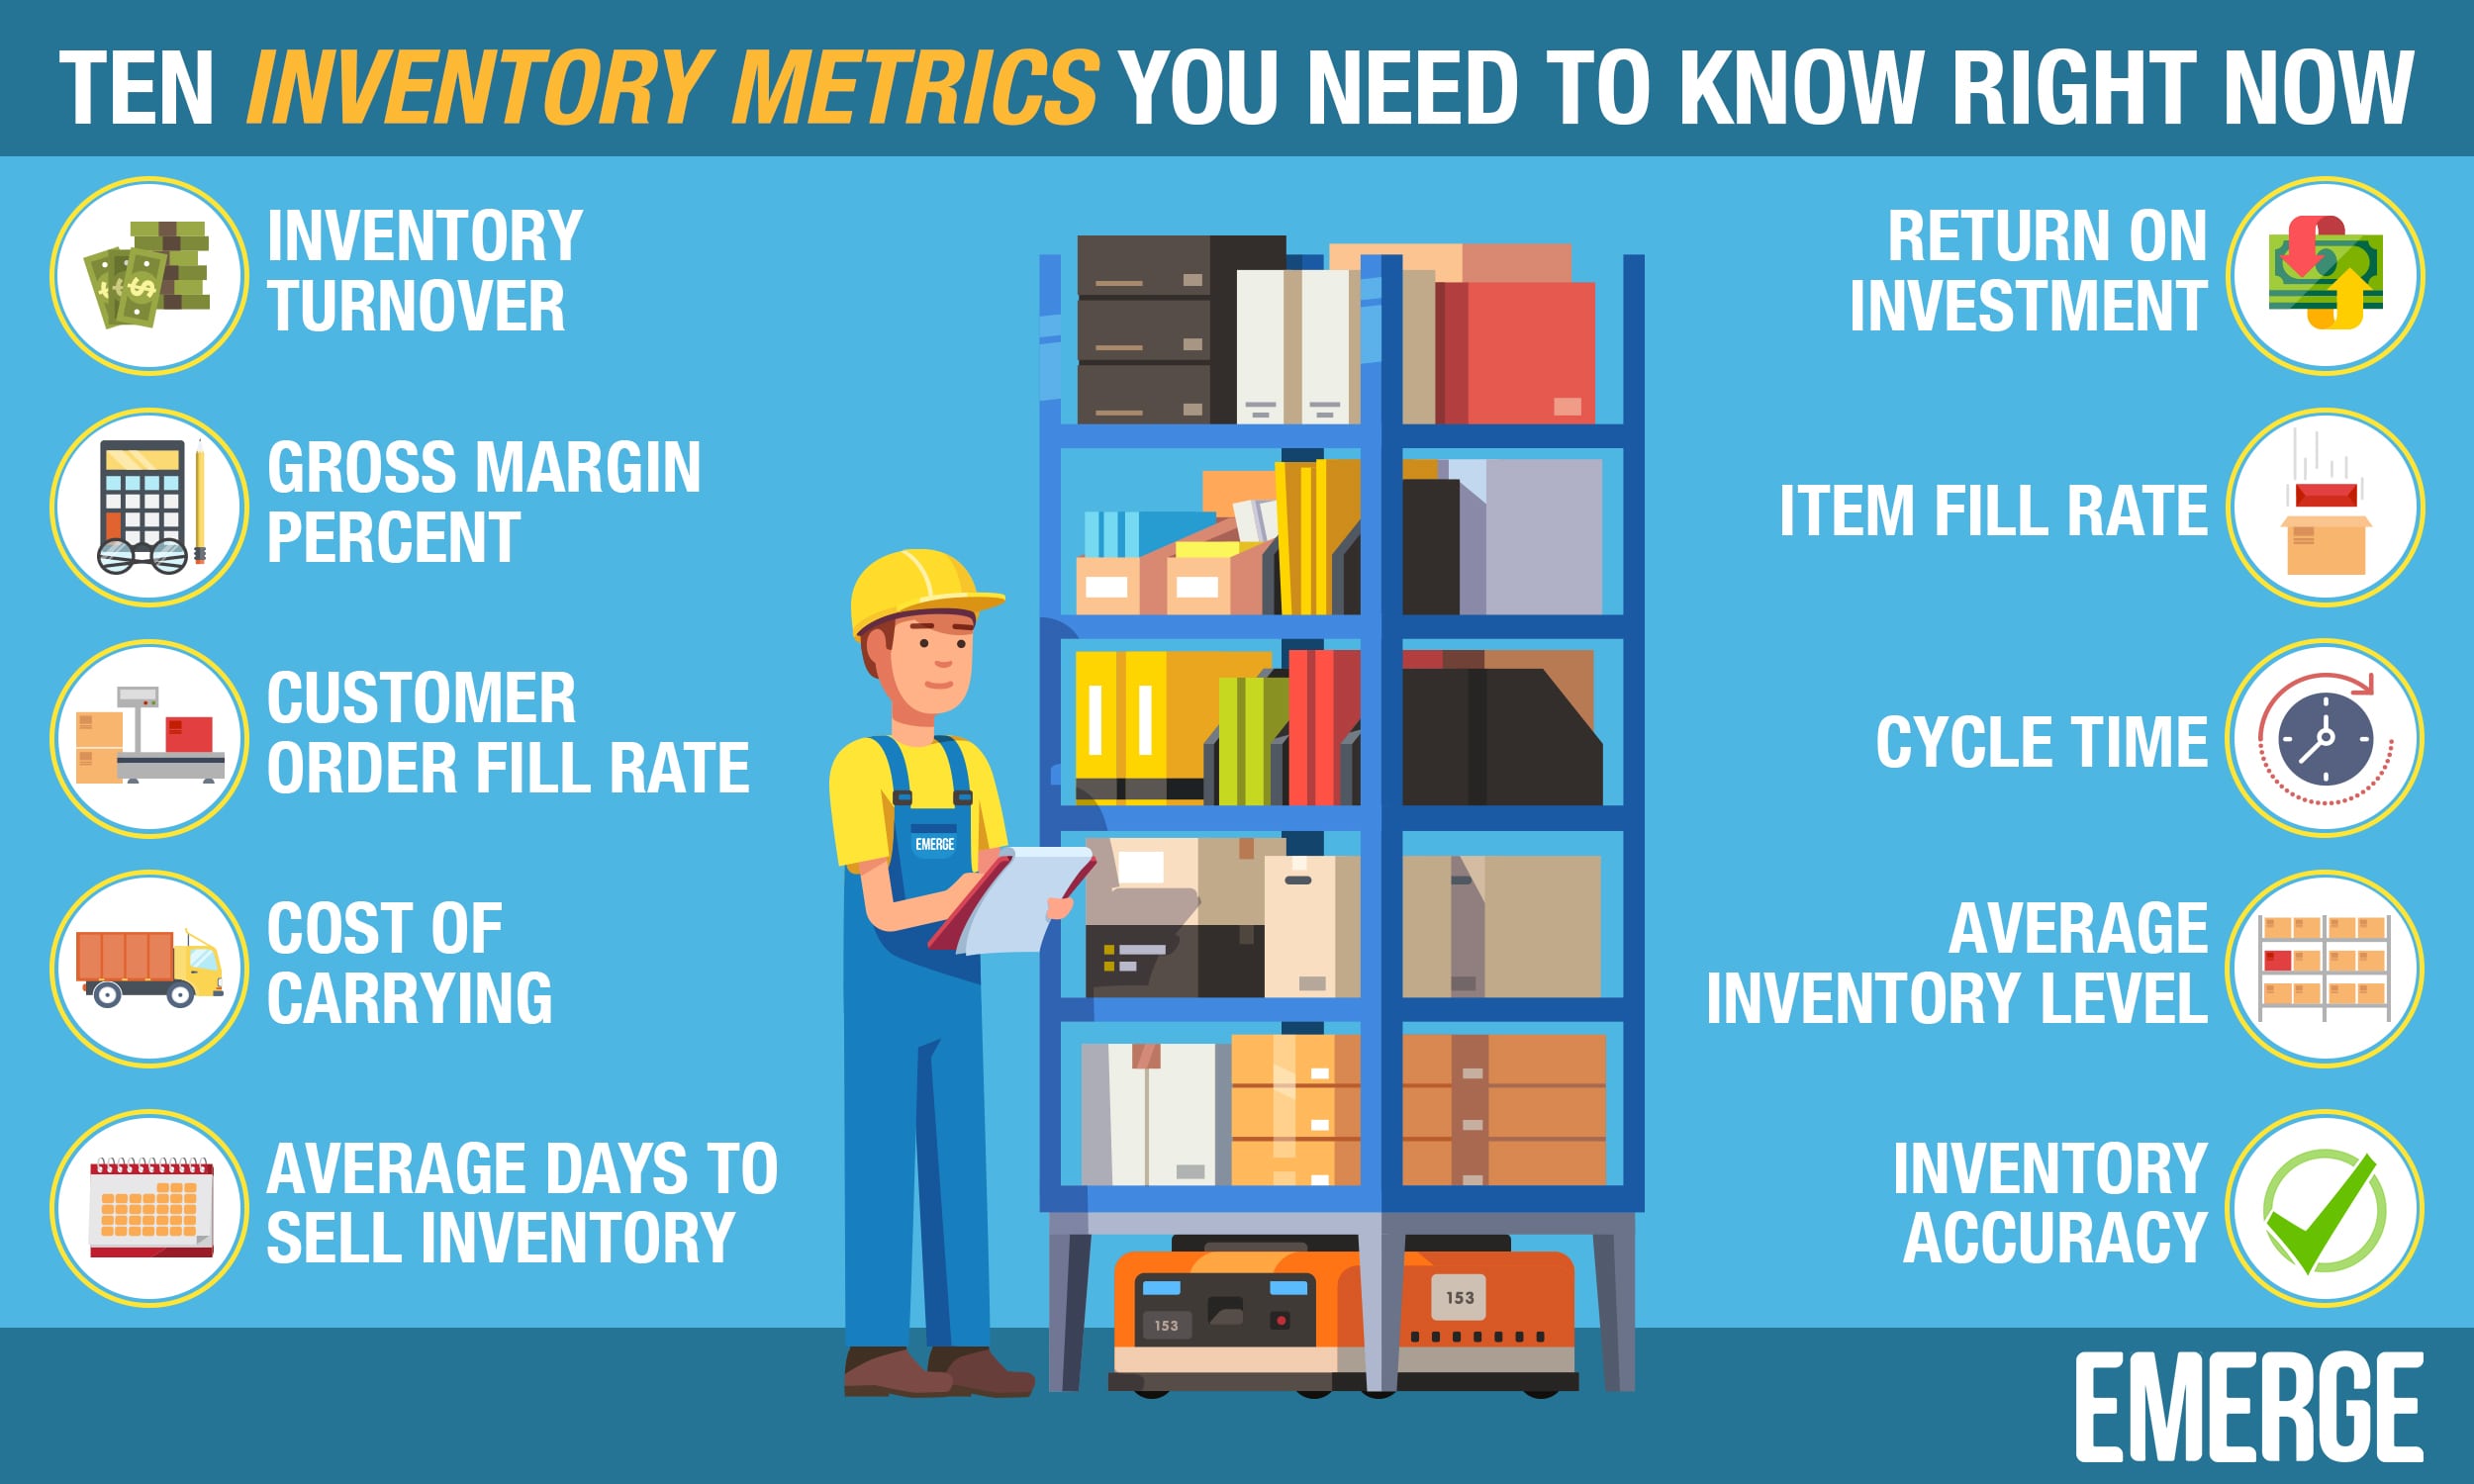 10 Inventory Metrics You Need to Know - Inventory Management Metrics